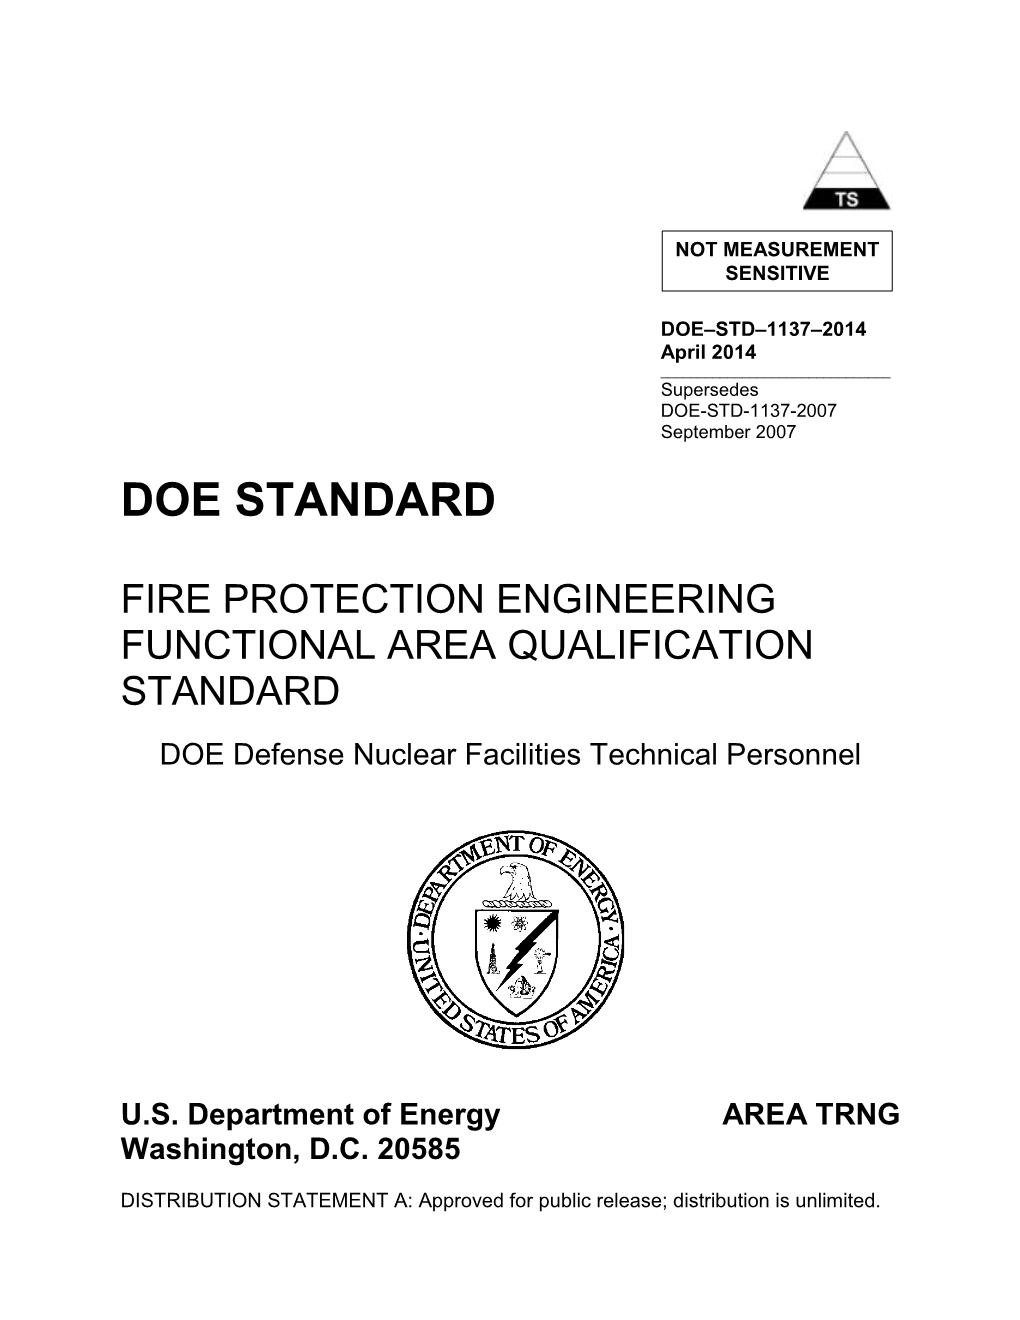 FIRE PROTECTION ENGINEERING FUNCTIONAL AREA QUALIFICATION STANDARD DOE Defense Nuclear Facilities Technical Personnel